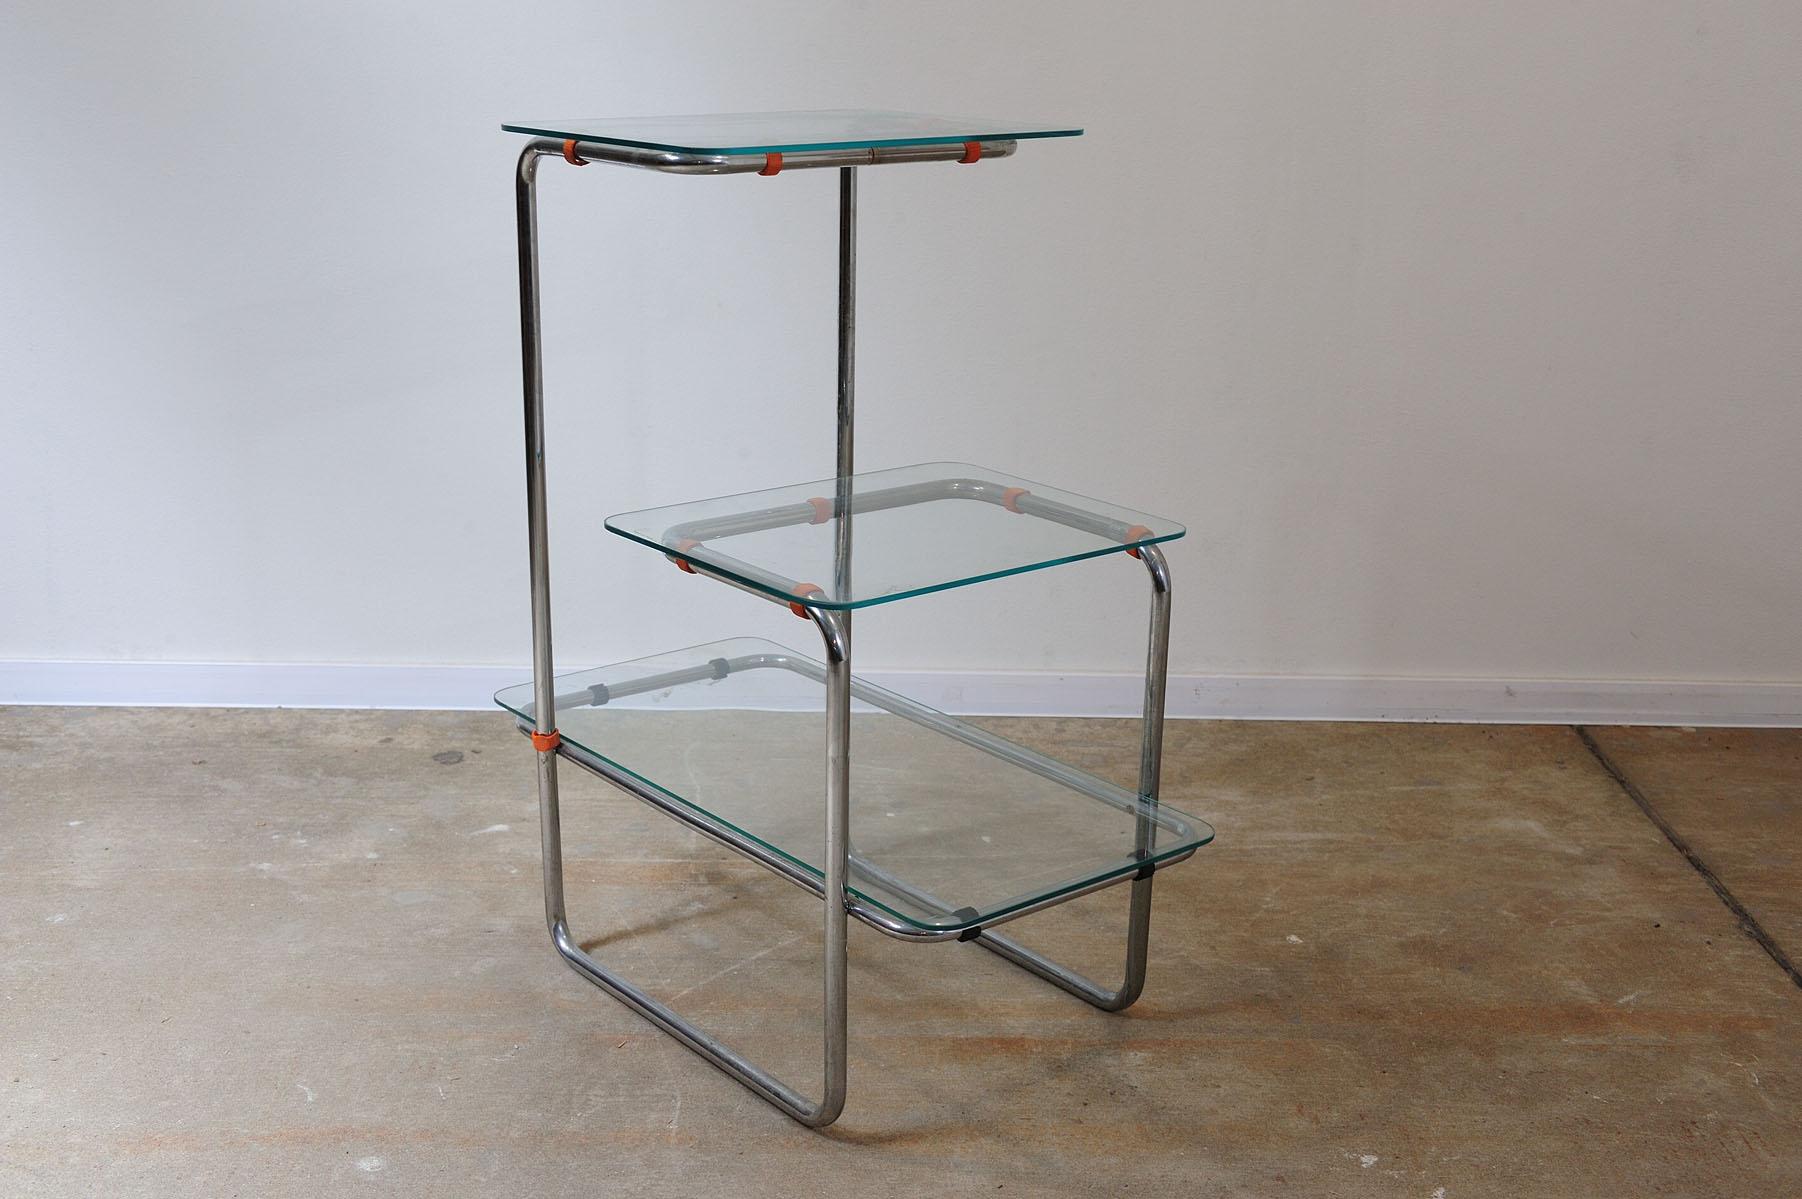  Vintage flower Stand Thonet B 136 by Emile Guyot, 1930´s For Sale 3